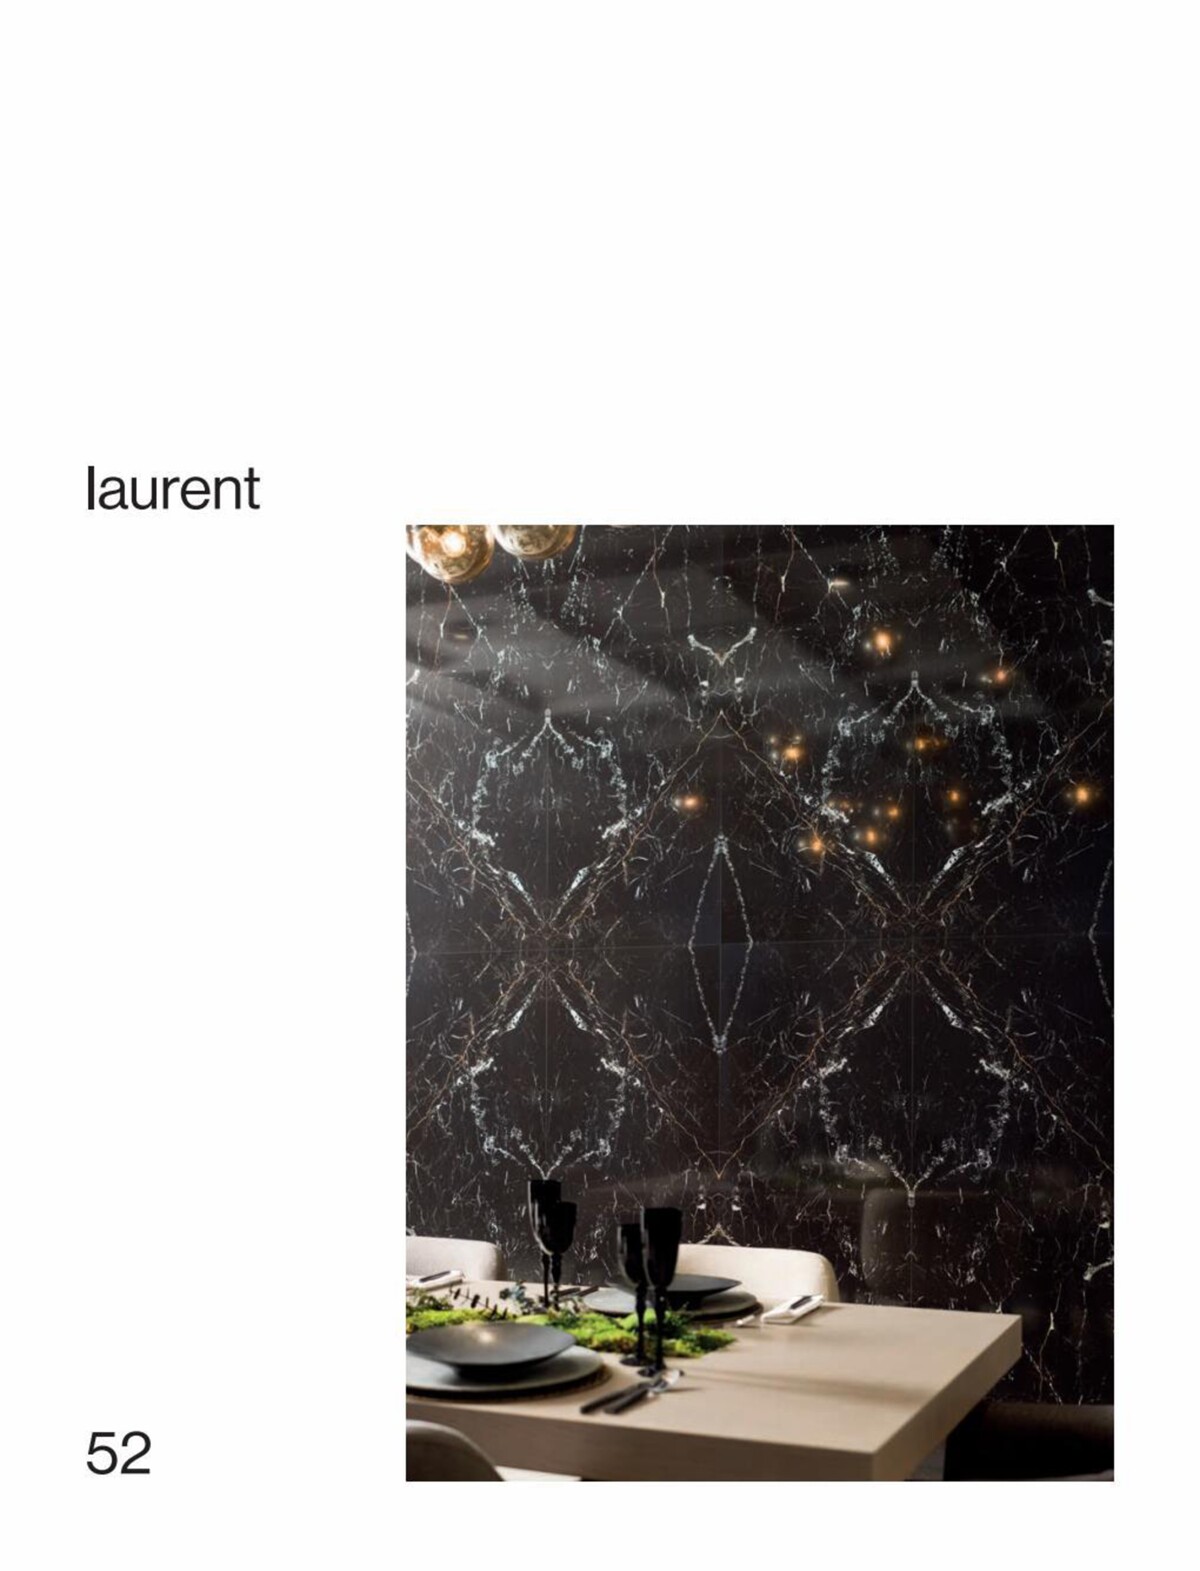 Catalogue MARMI,a ceramic tile that echoes the purity of marble, page 00052